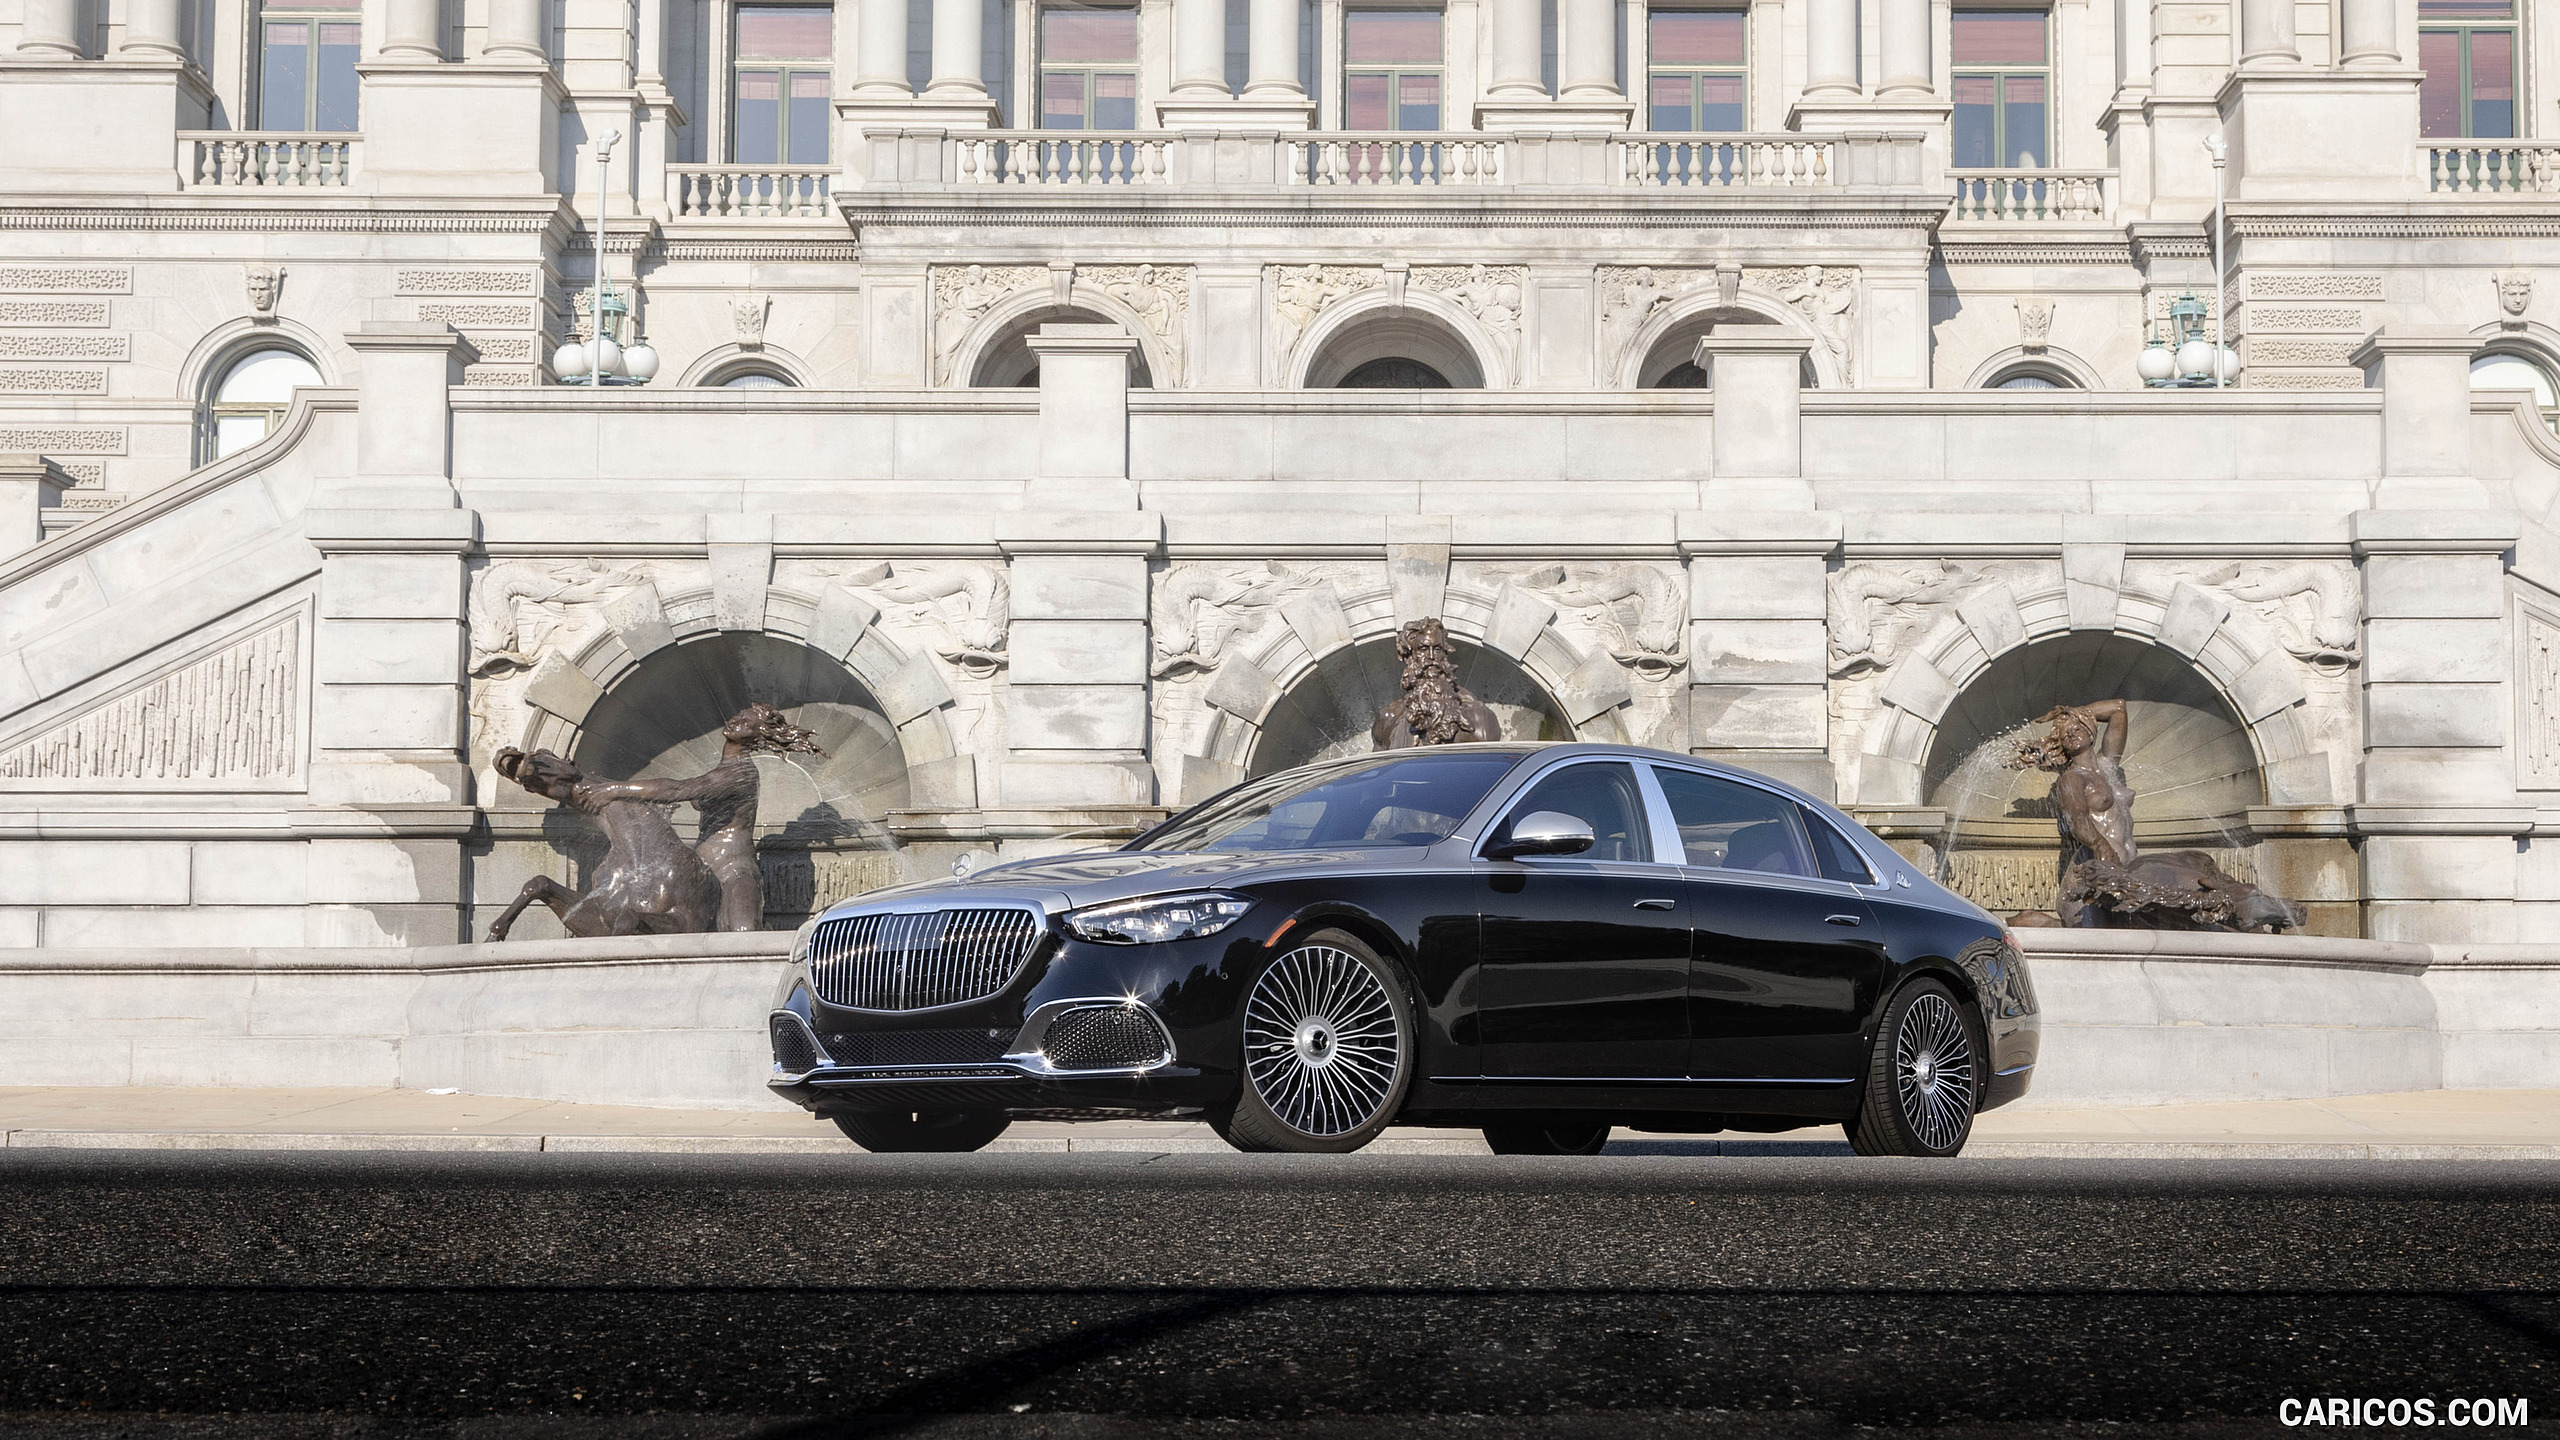 2022 Mercedes-Maybach S 680 4MATIC (US-Spec) - Front Three-Quarter, #131 of 173